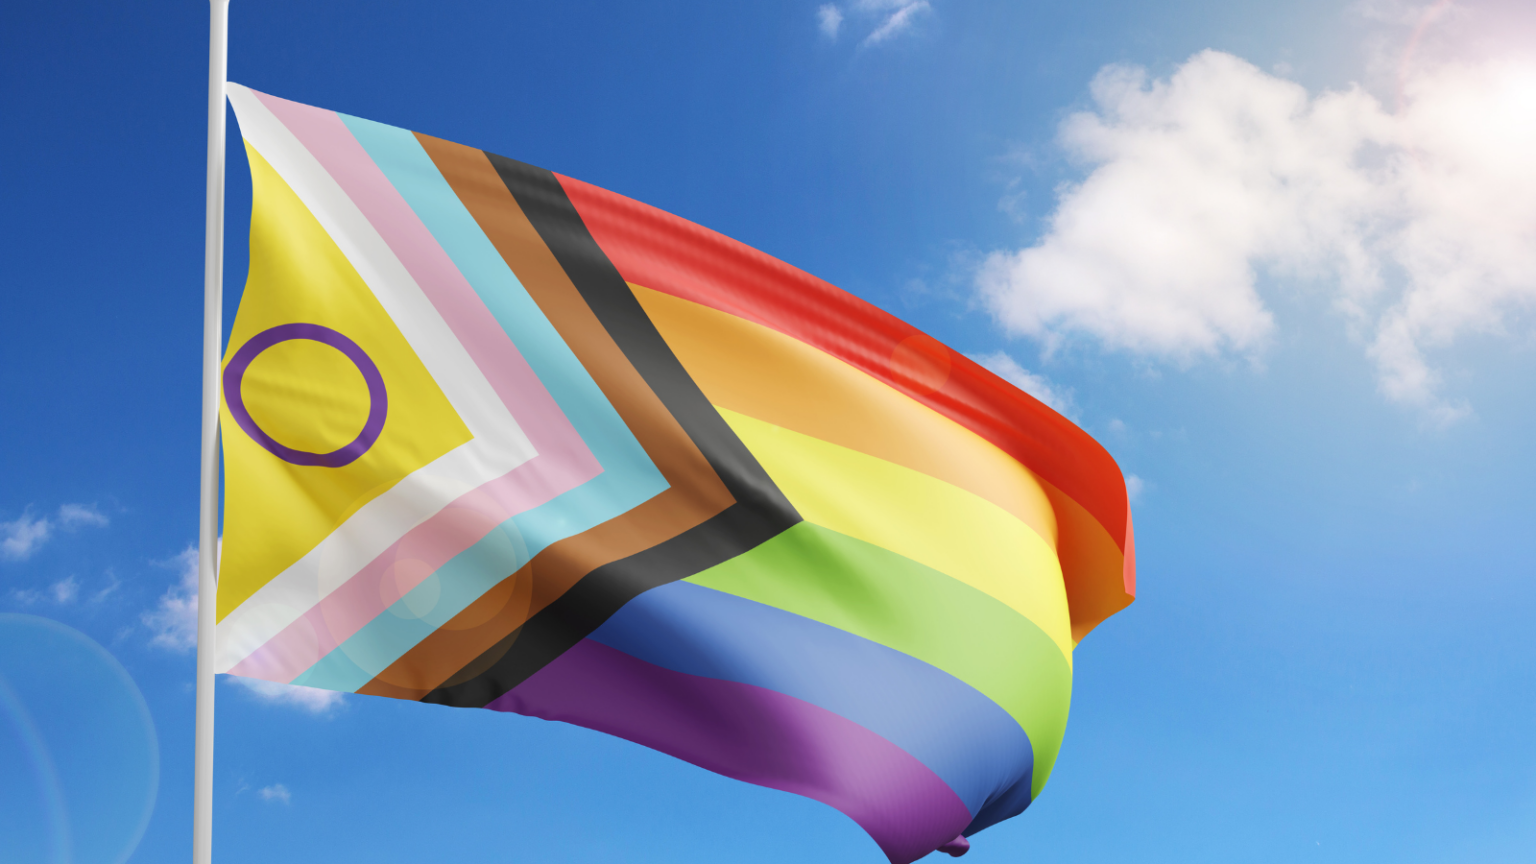 The inclusive pride flag, with elements of the intersex, trans, and rainbow flags, and black and brown stripes.